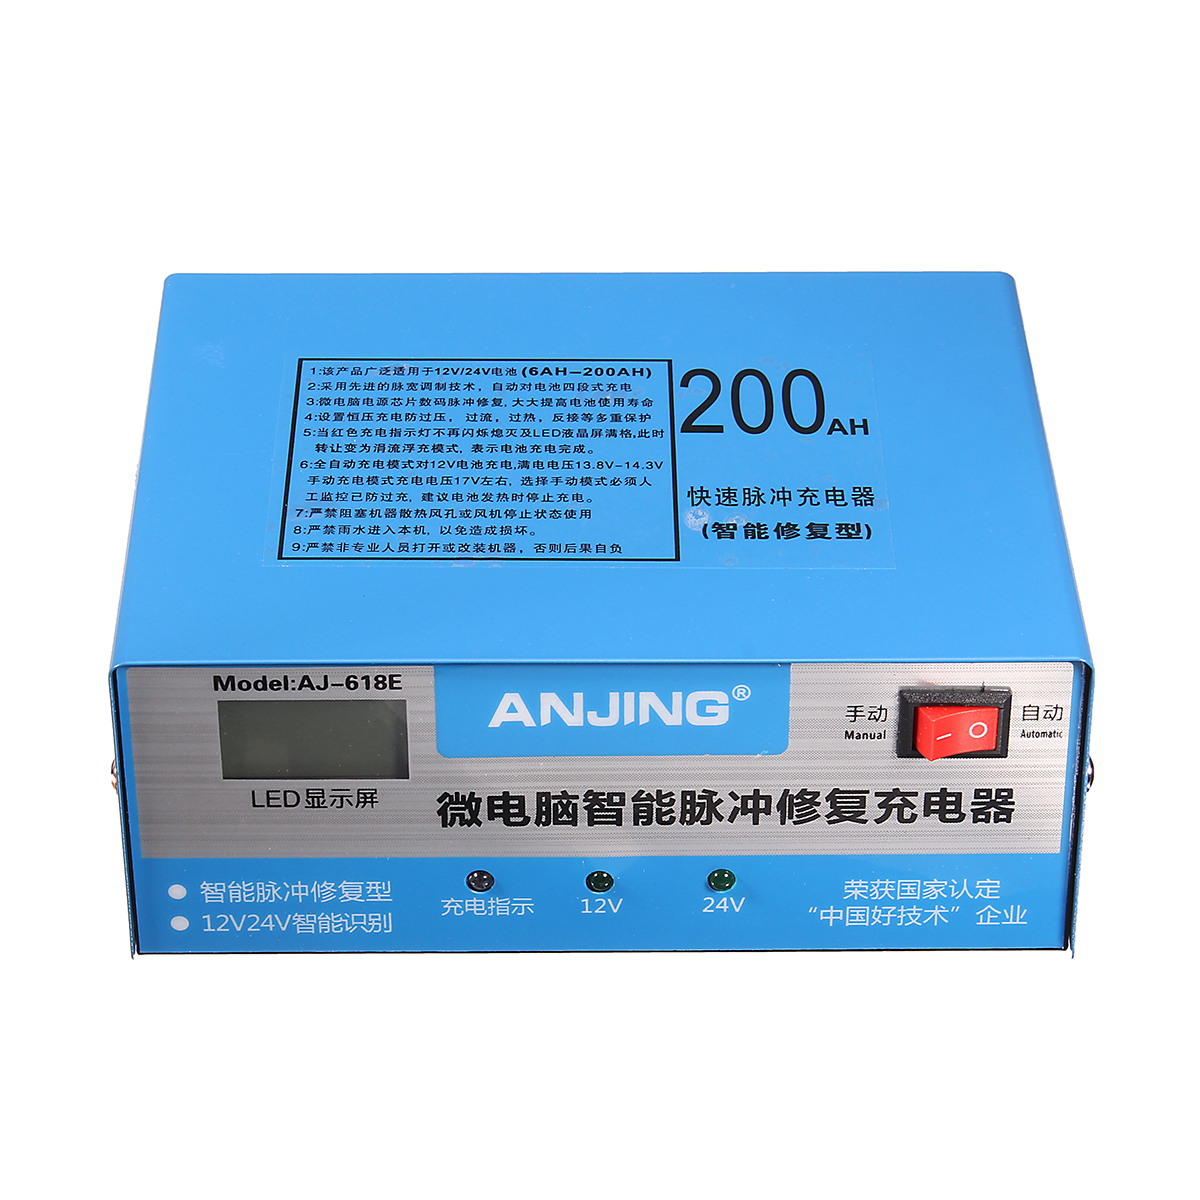 ANJING AJ-618E 130V-250V 200AH Automatic Battery Charger Intelligent Pulse Repair Battery Charger 2